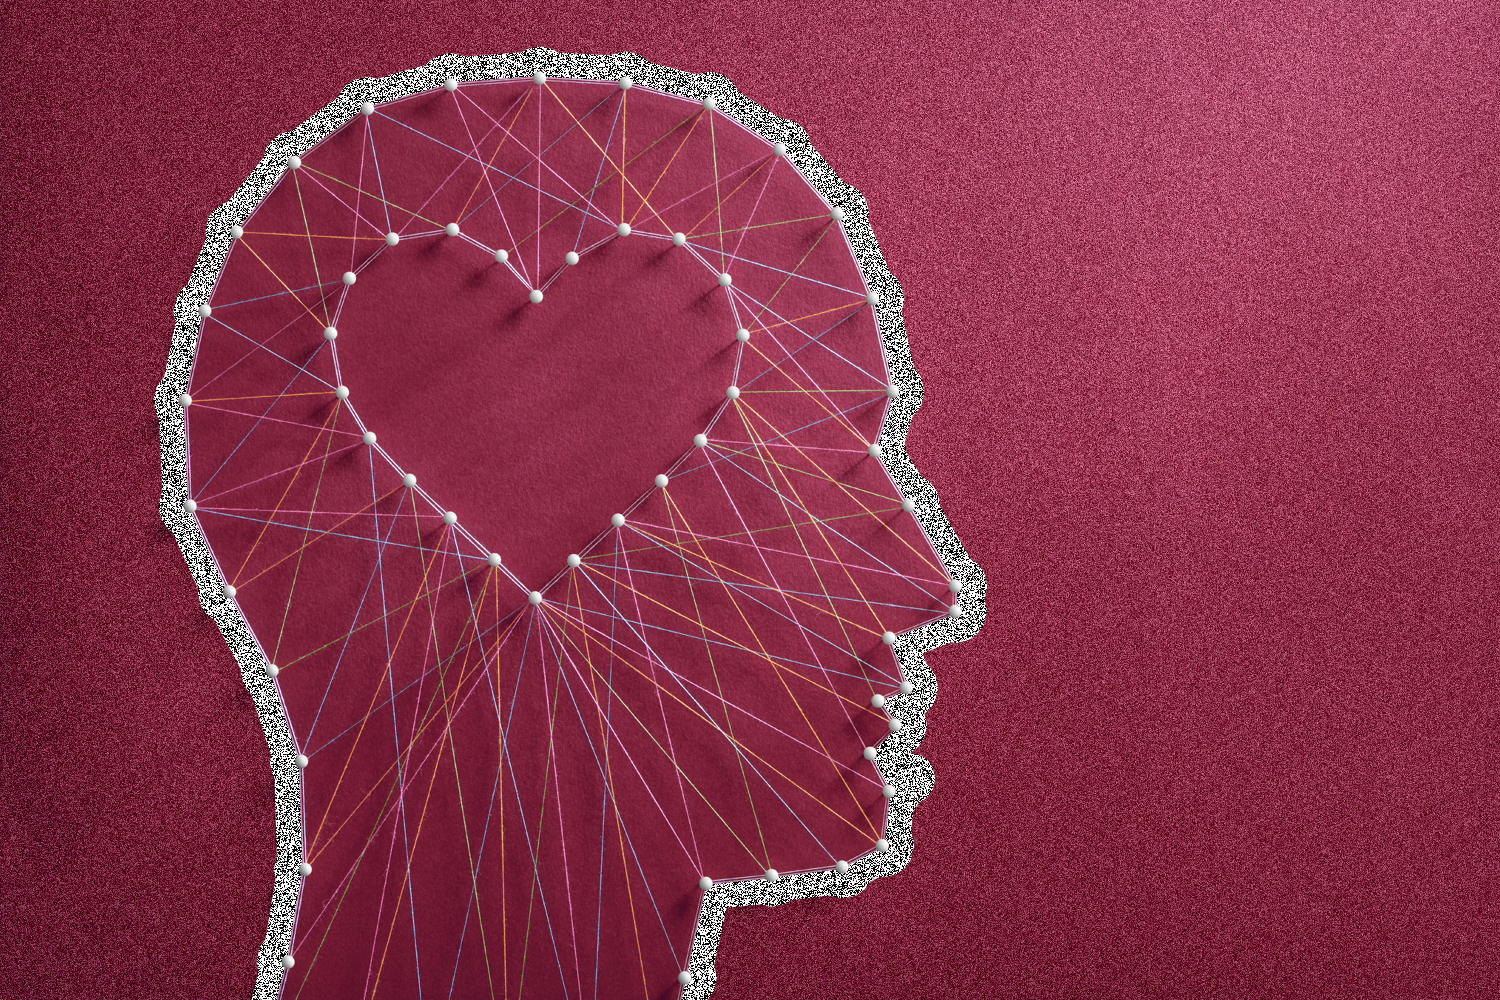 An outline of a person's head with pins and strings with a heart where their brain should be